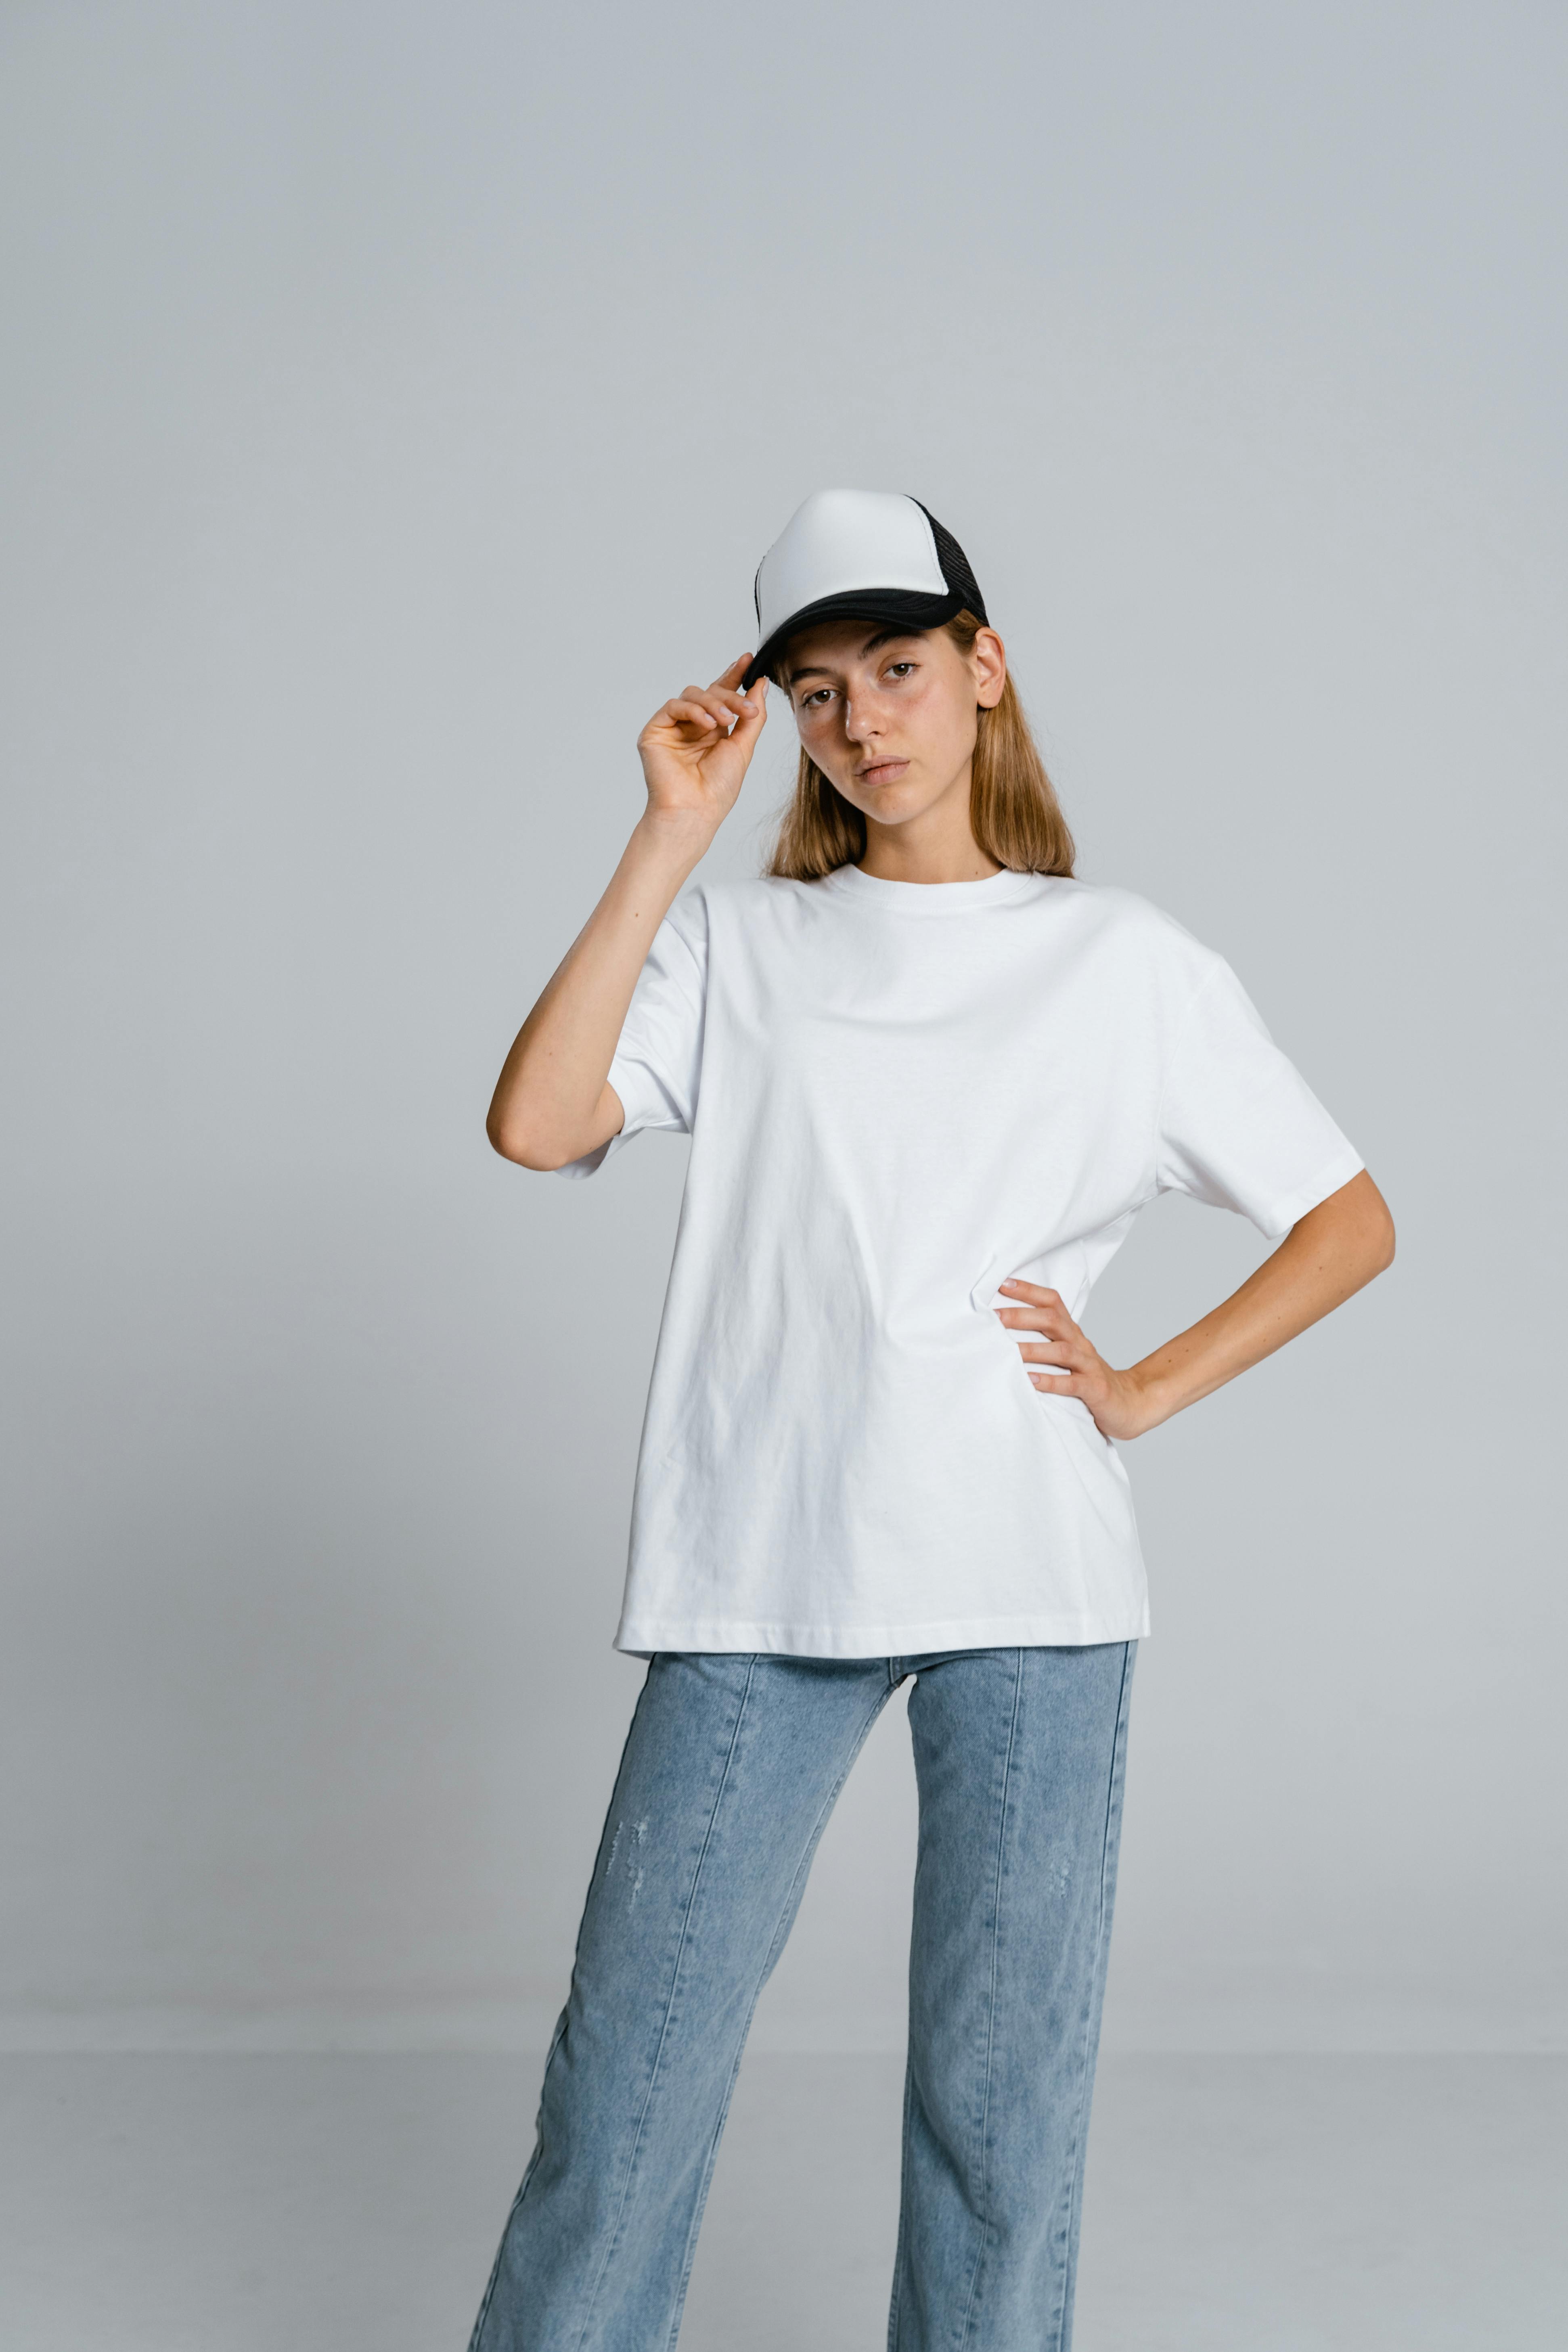 White T-Shirt Outfit Ideas - White T-Shirt Style Inspiration